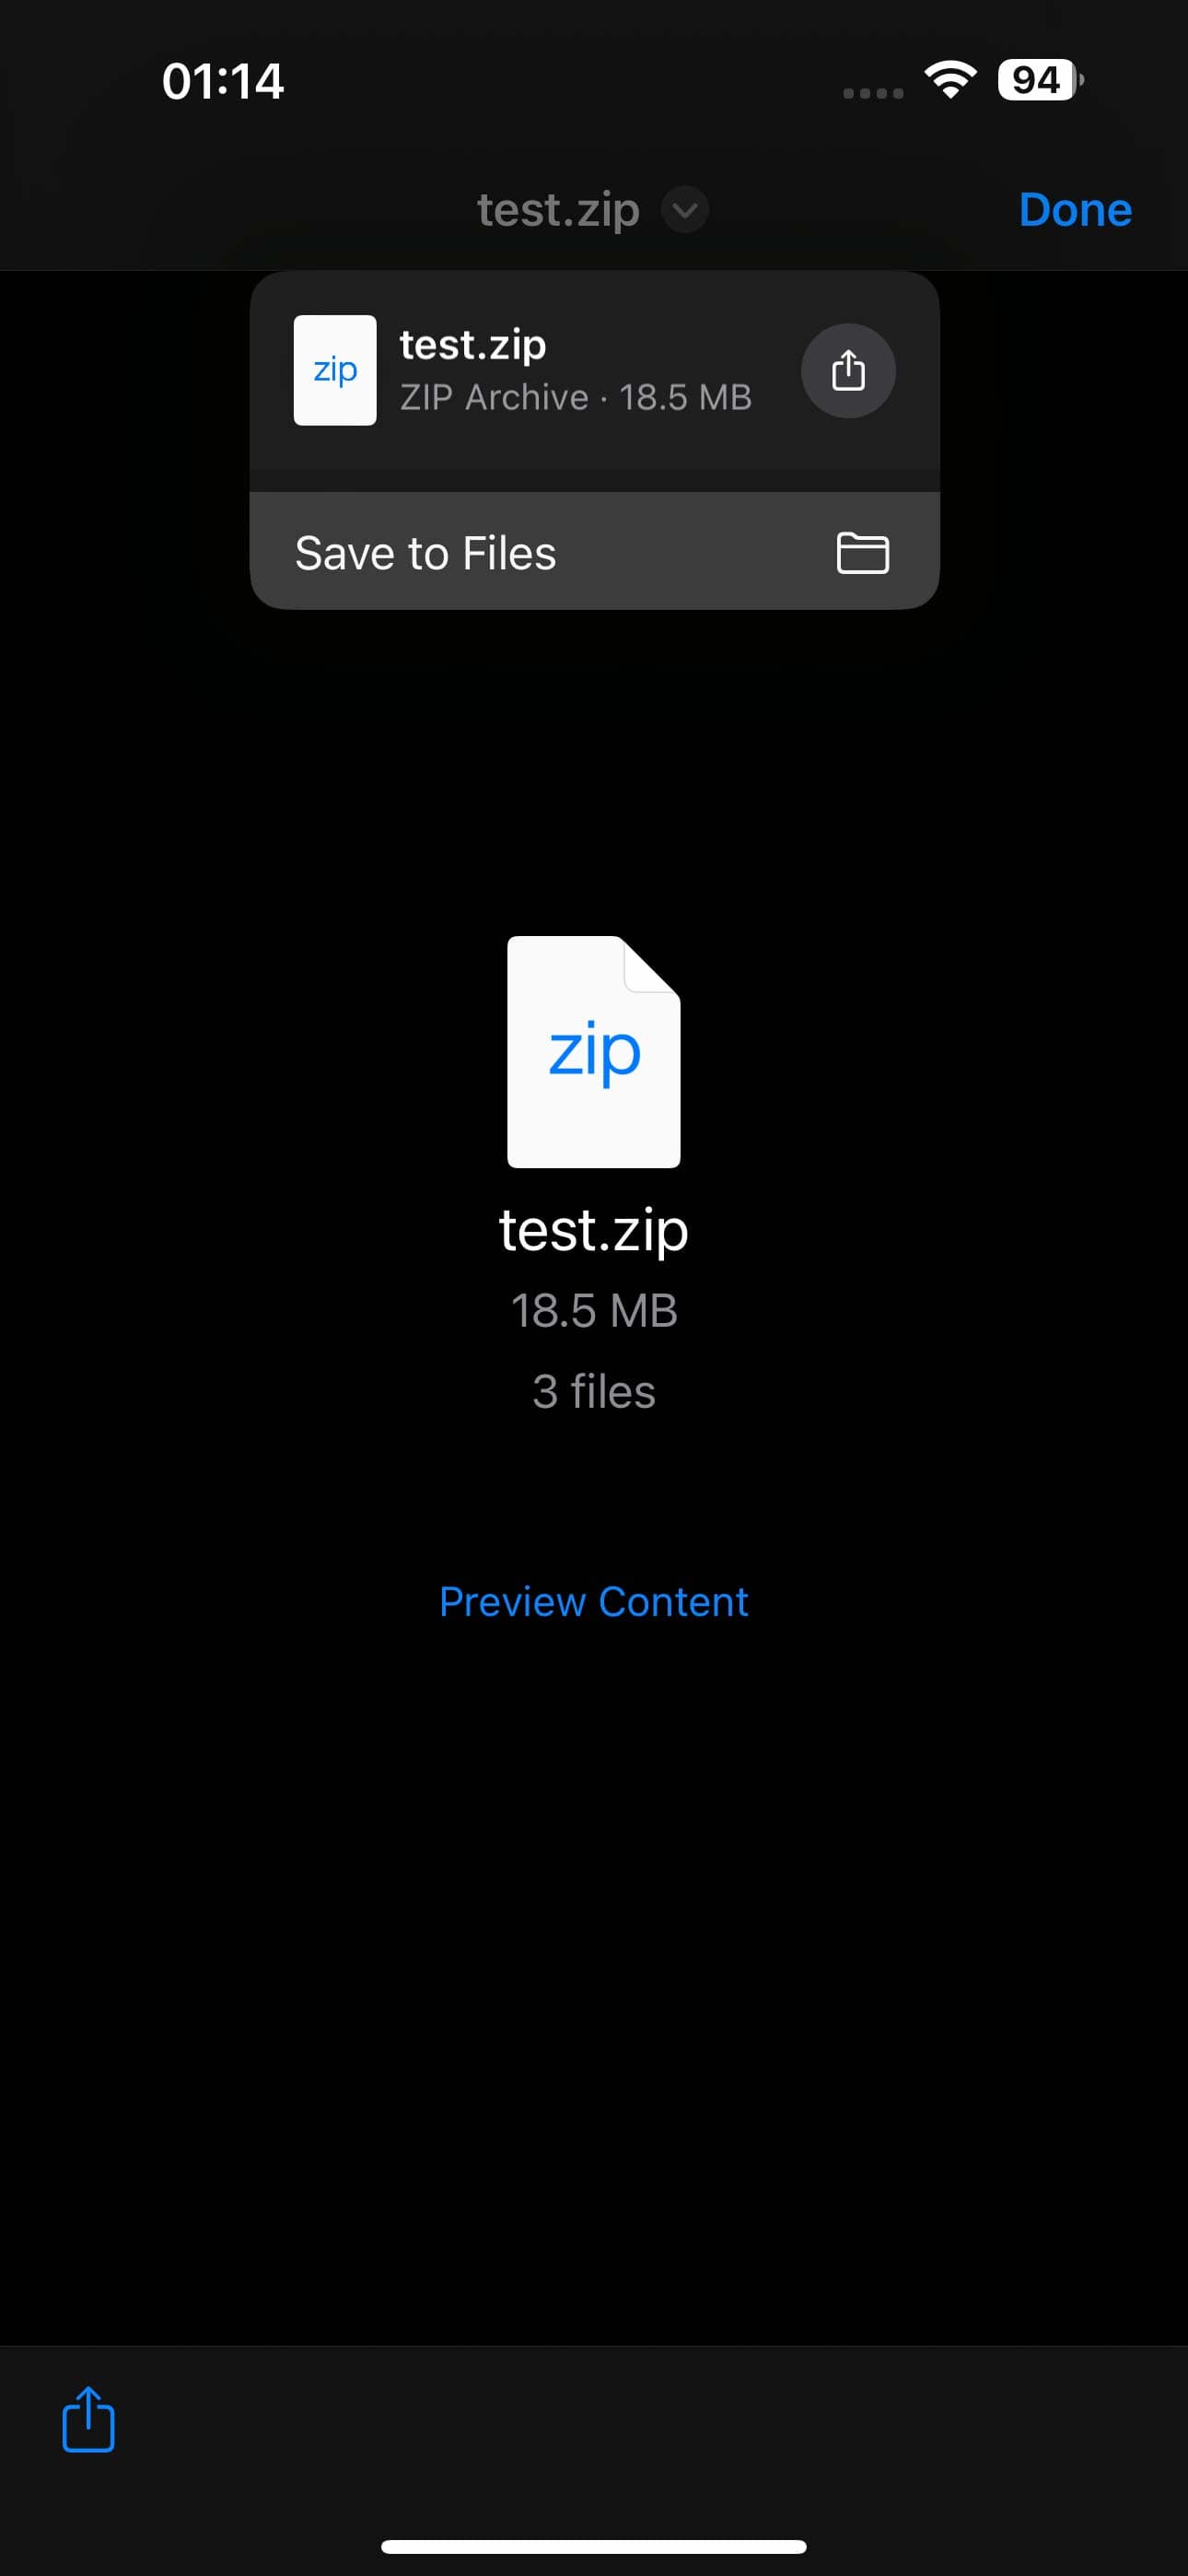 How to unzip files on iOS